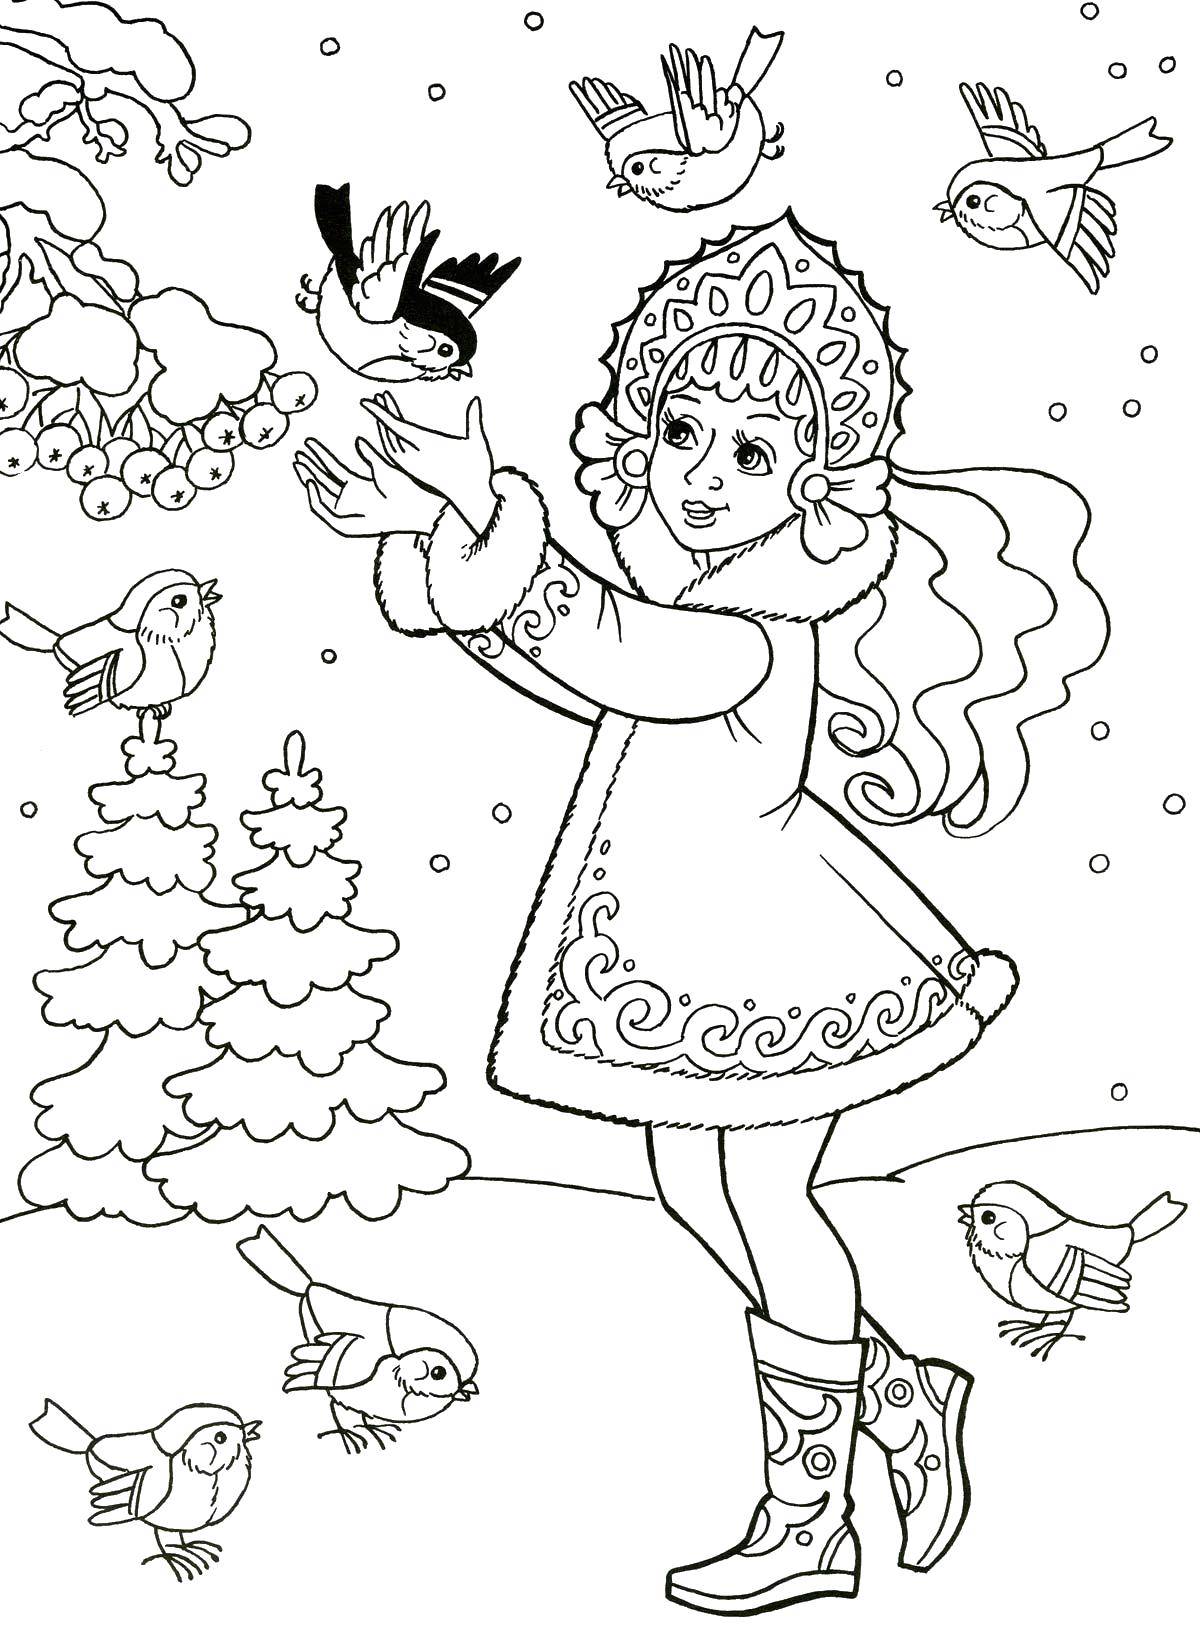 Coloring Snow white and bullfinches. Category maiden. Tags:  Snow maiden, winter, New Year.